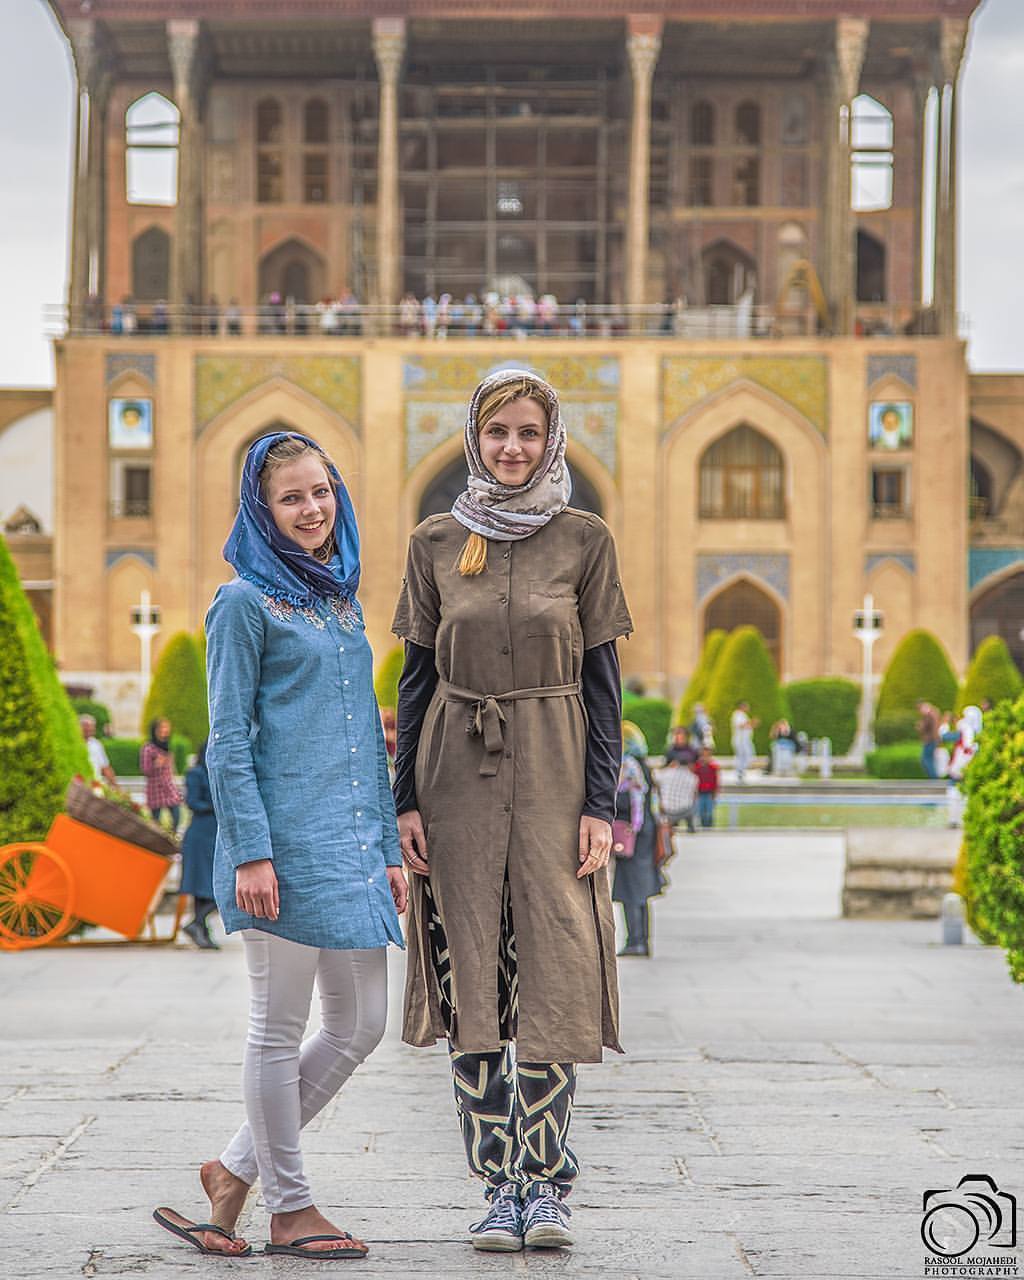 Tourists in the Naghsh-e Jahan Square